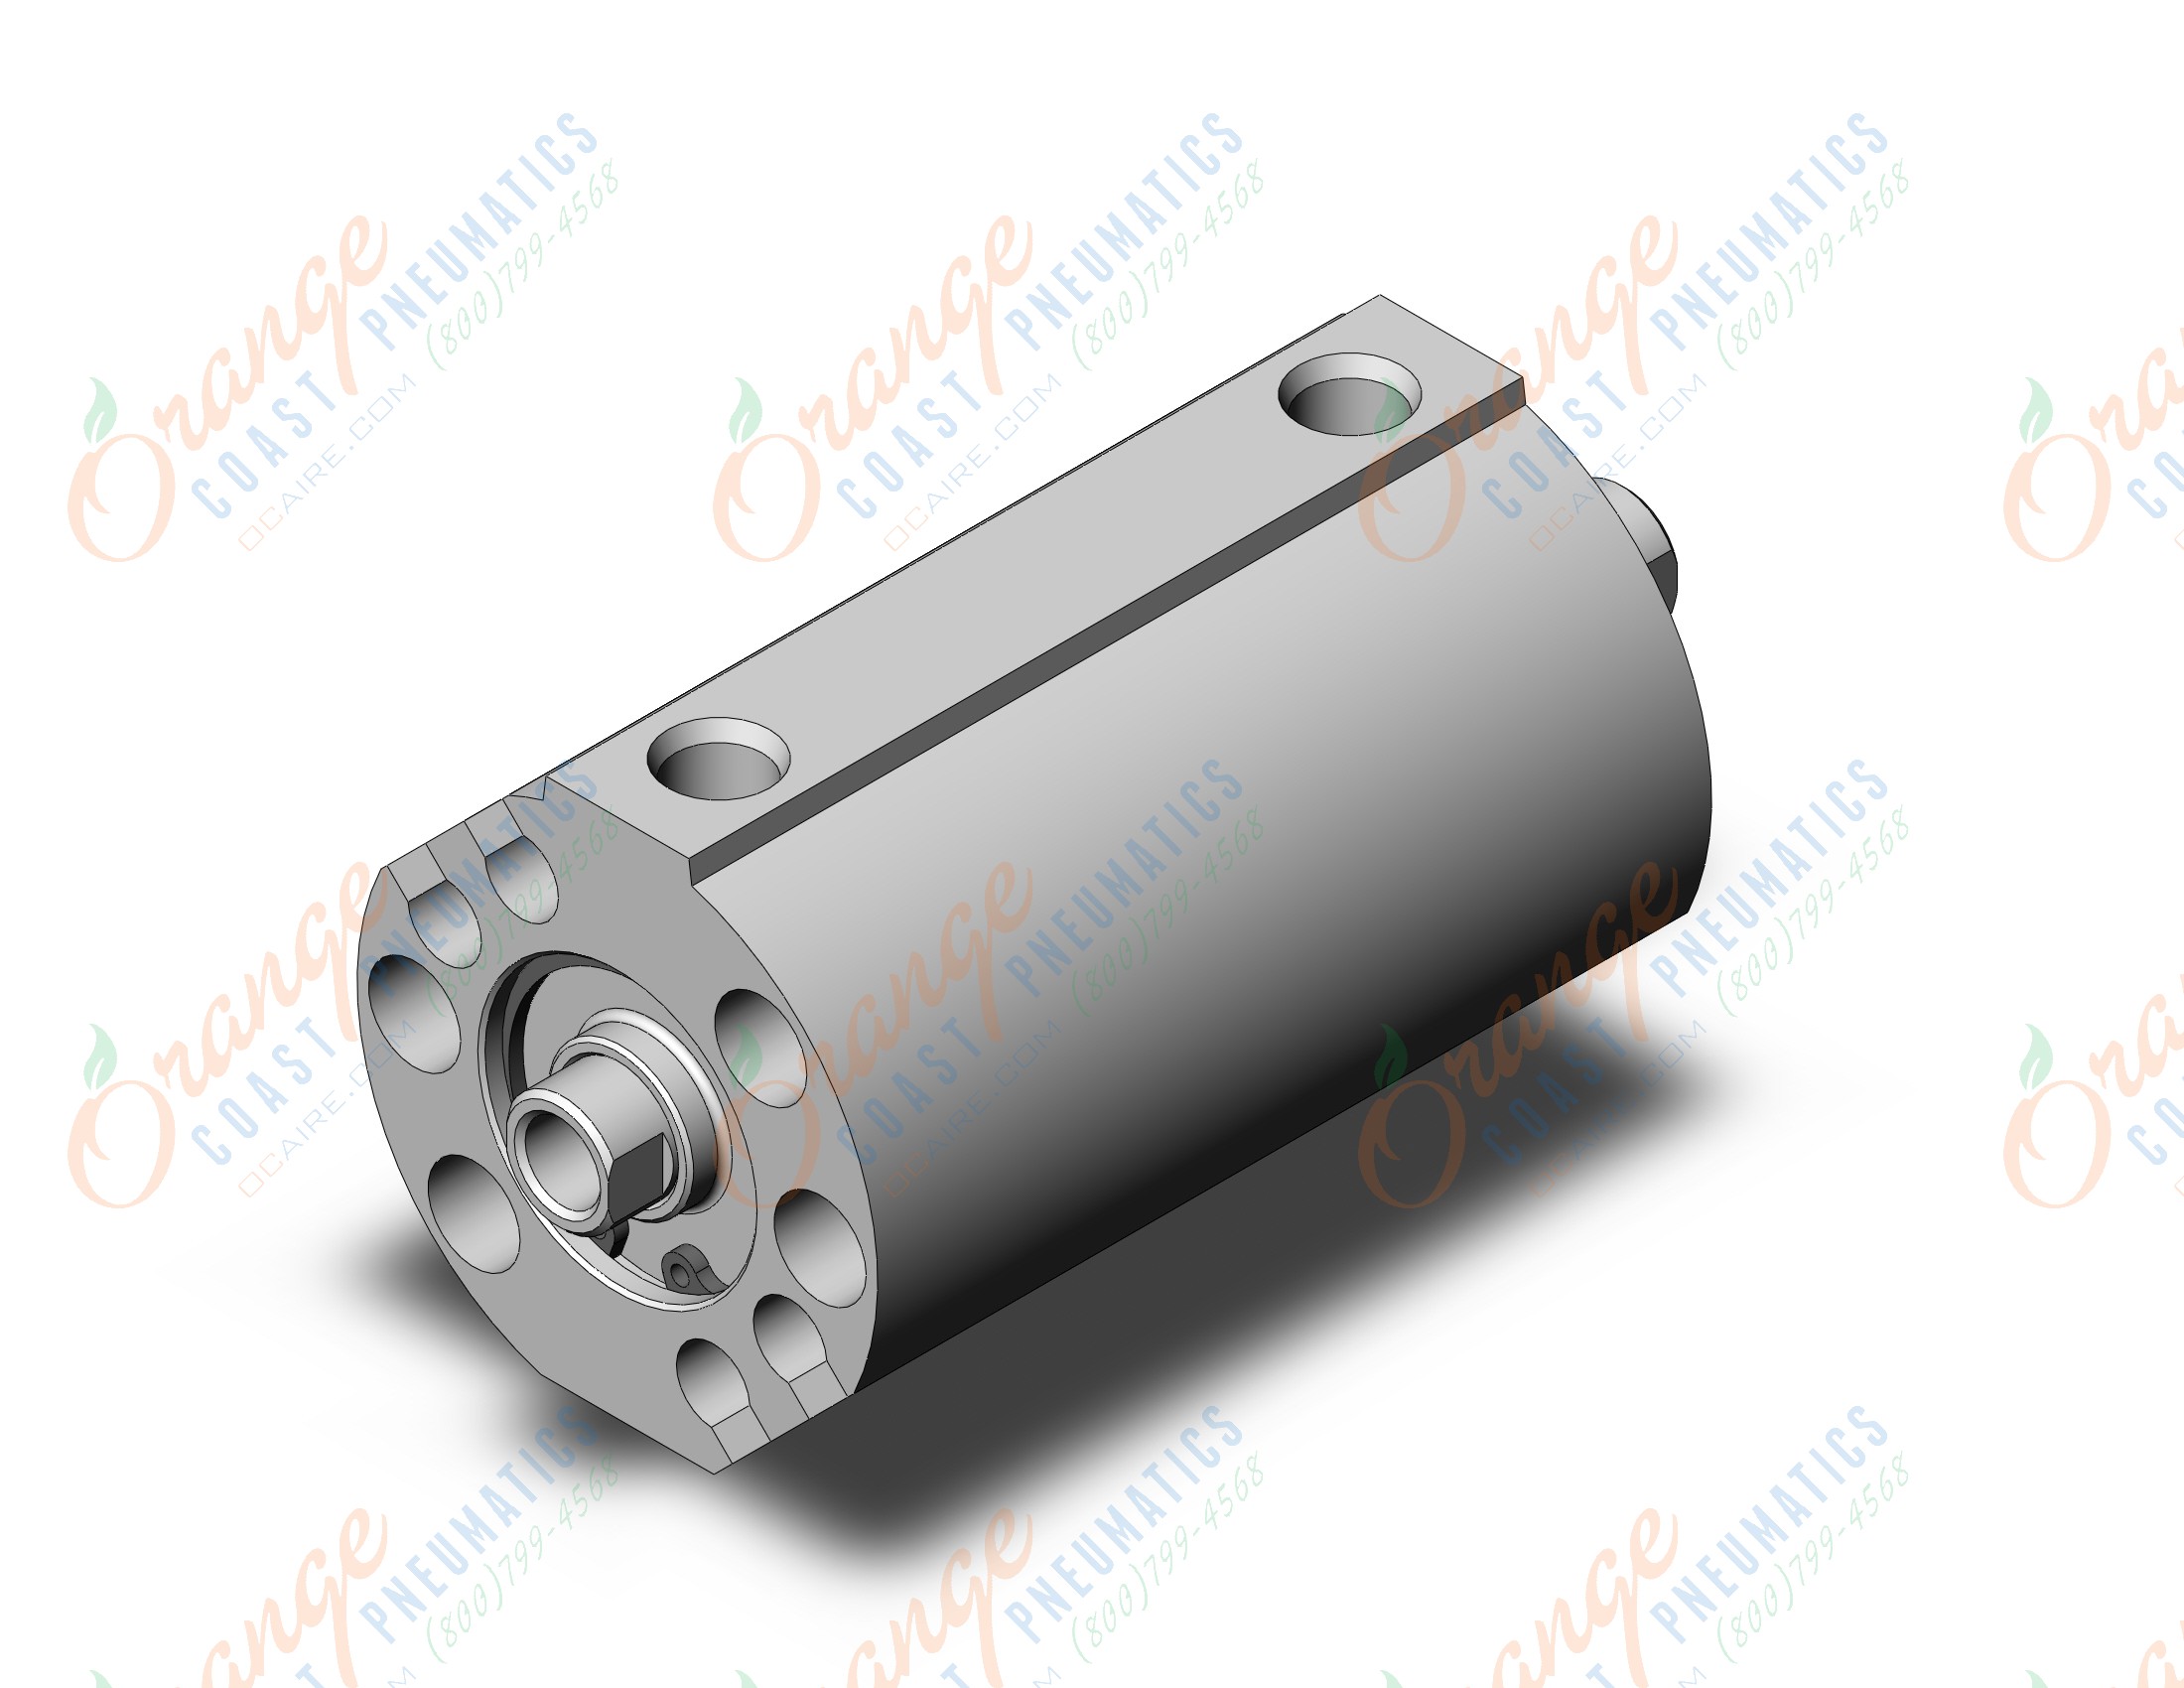 SMC NCDQ8WE056-025 compact cylinder, ncq8, COMPACT CYLINDER